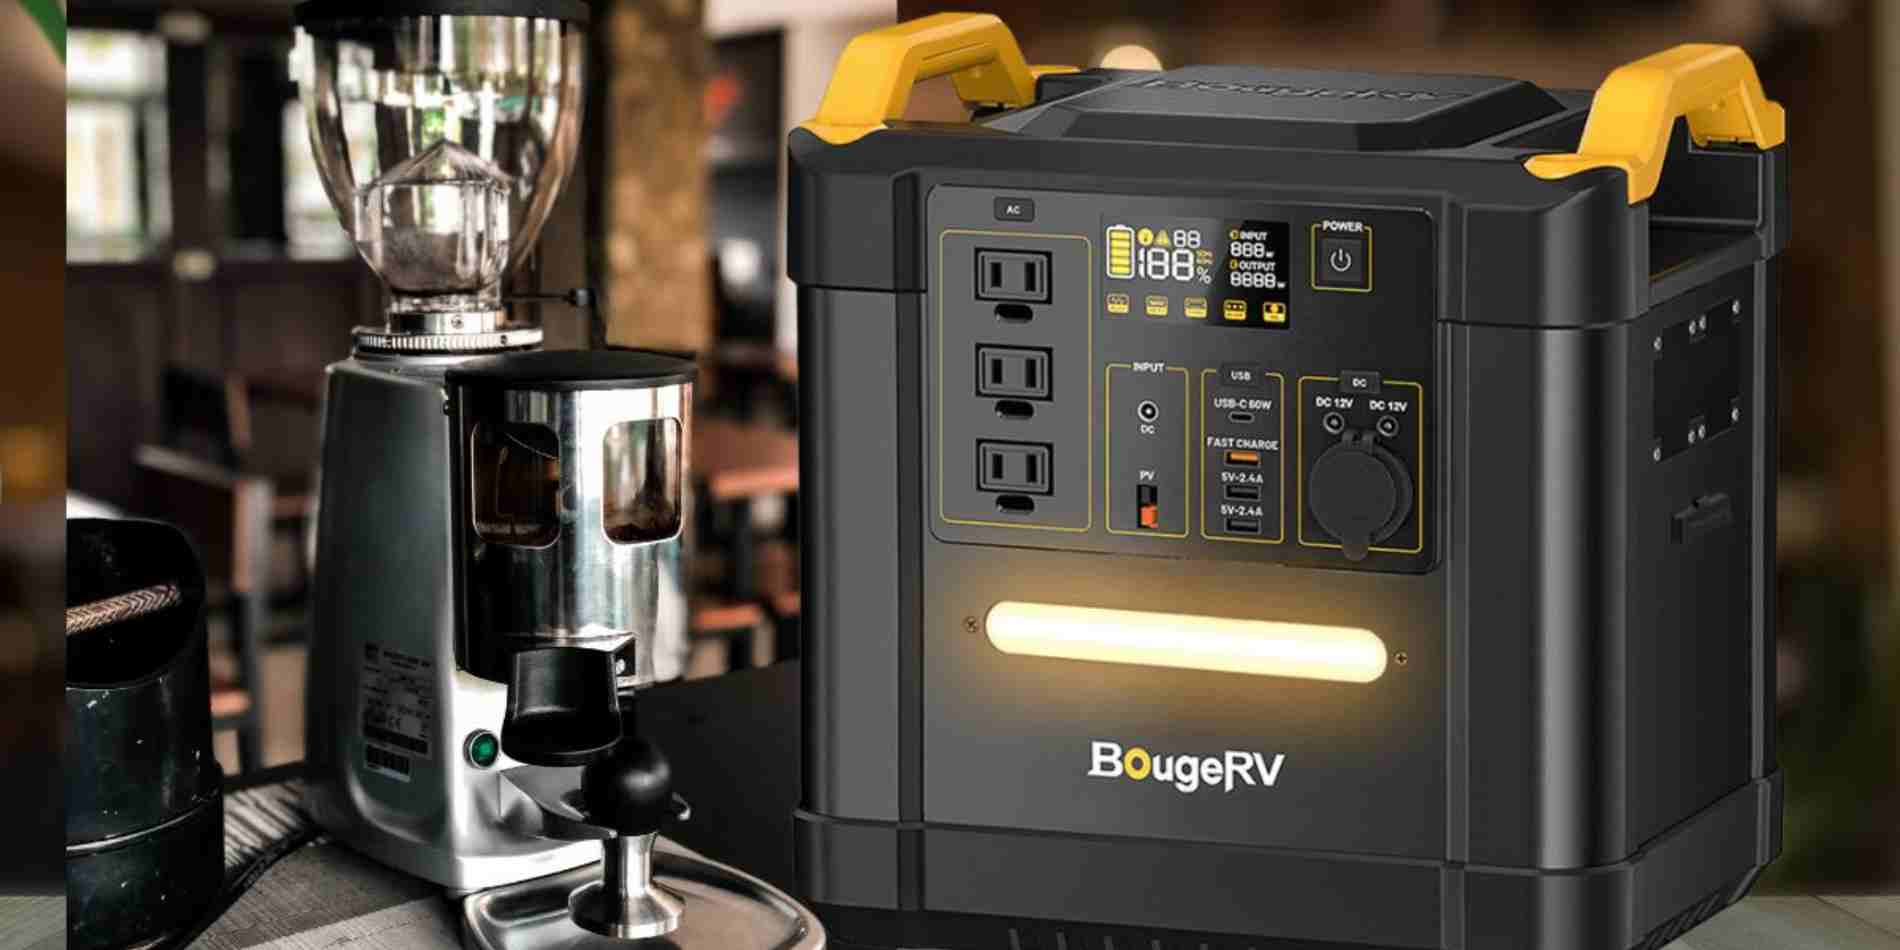 Can A Portable Power Station Run A Coffee Maker? – BougeRV